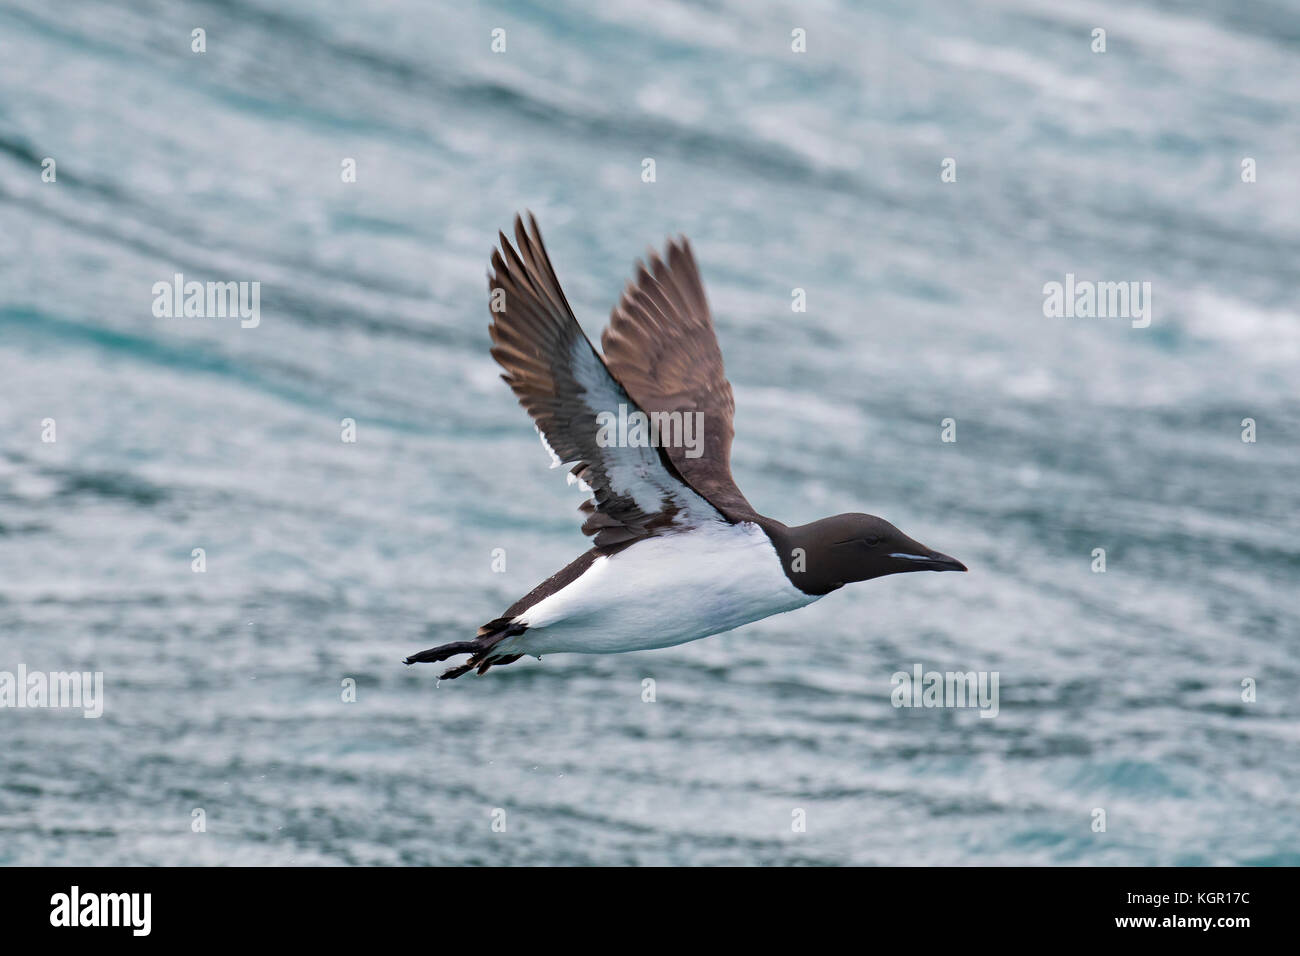 Thick-billed murre / Brünnich's guillemot (Uria lomvia) in flight above sea water, native to the sub-polar regions of the Northern Hemisphere Stock Photo